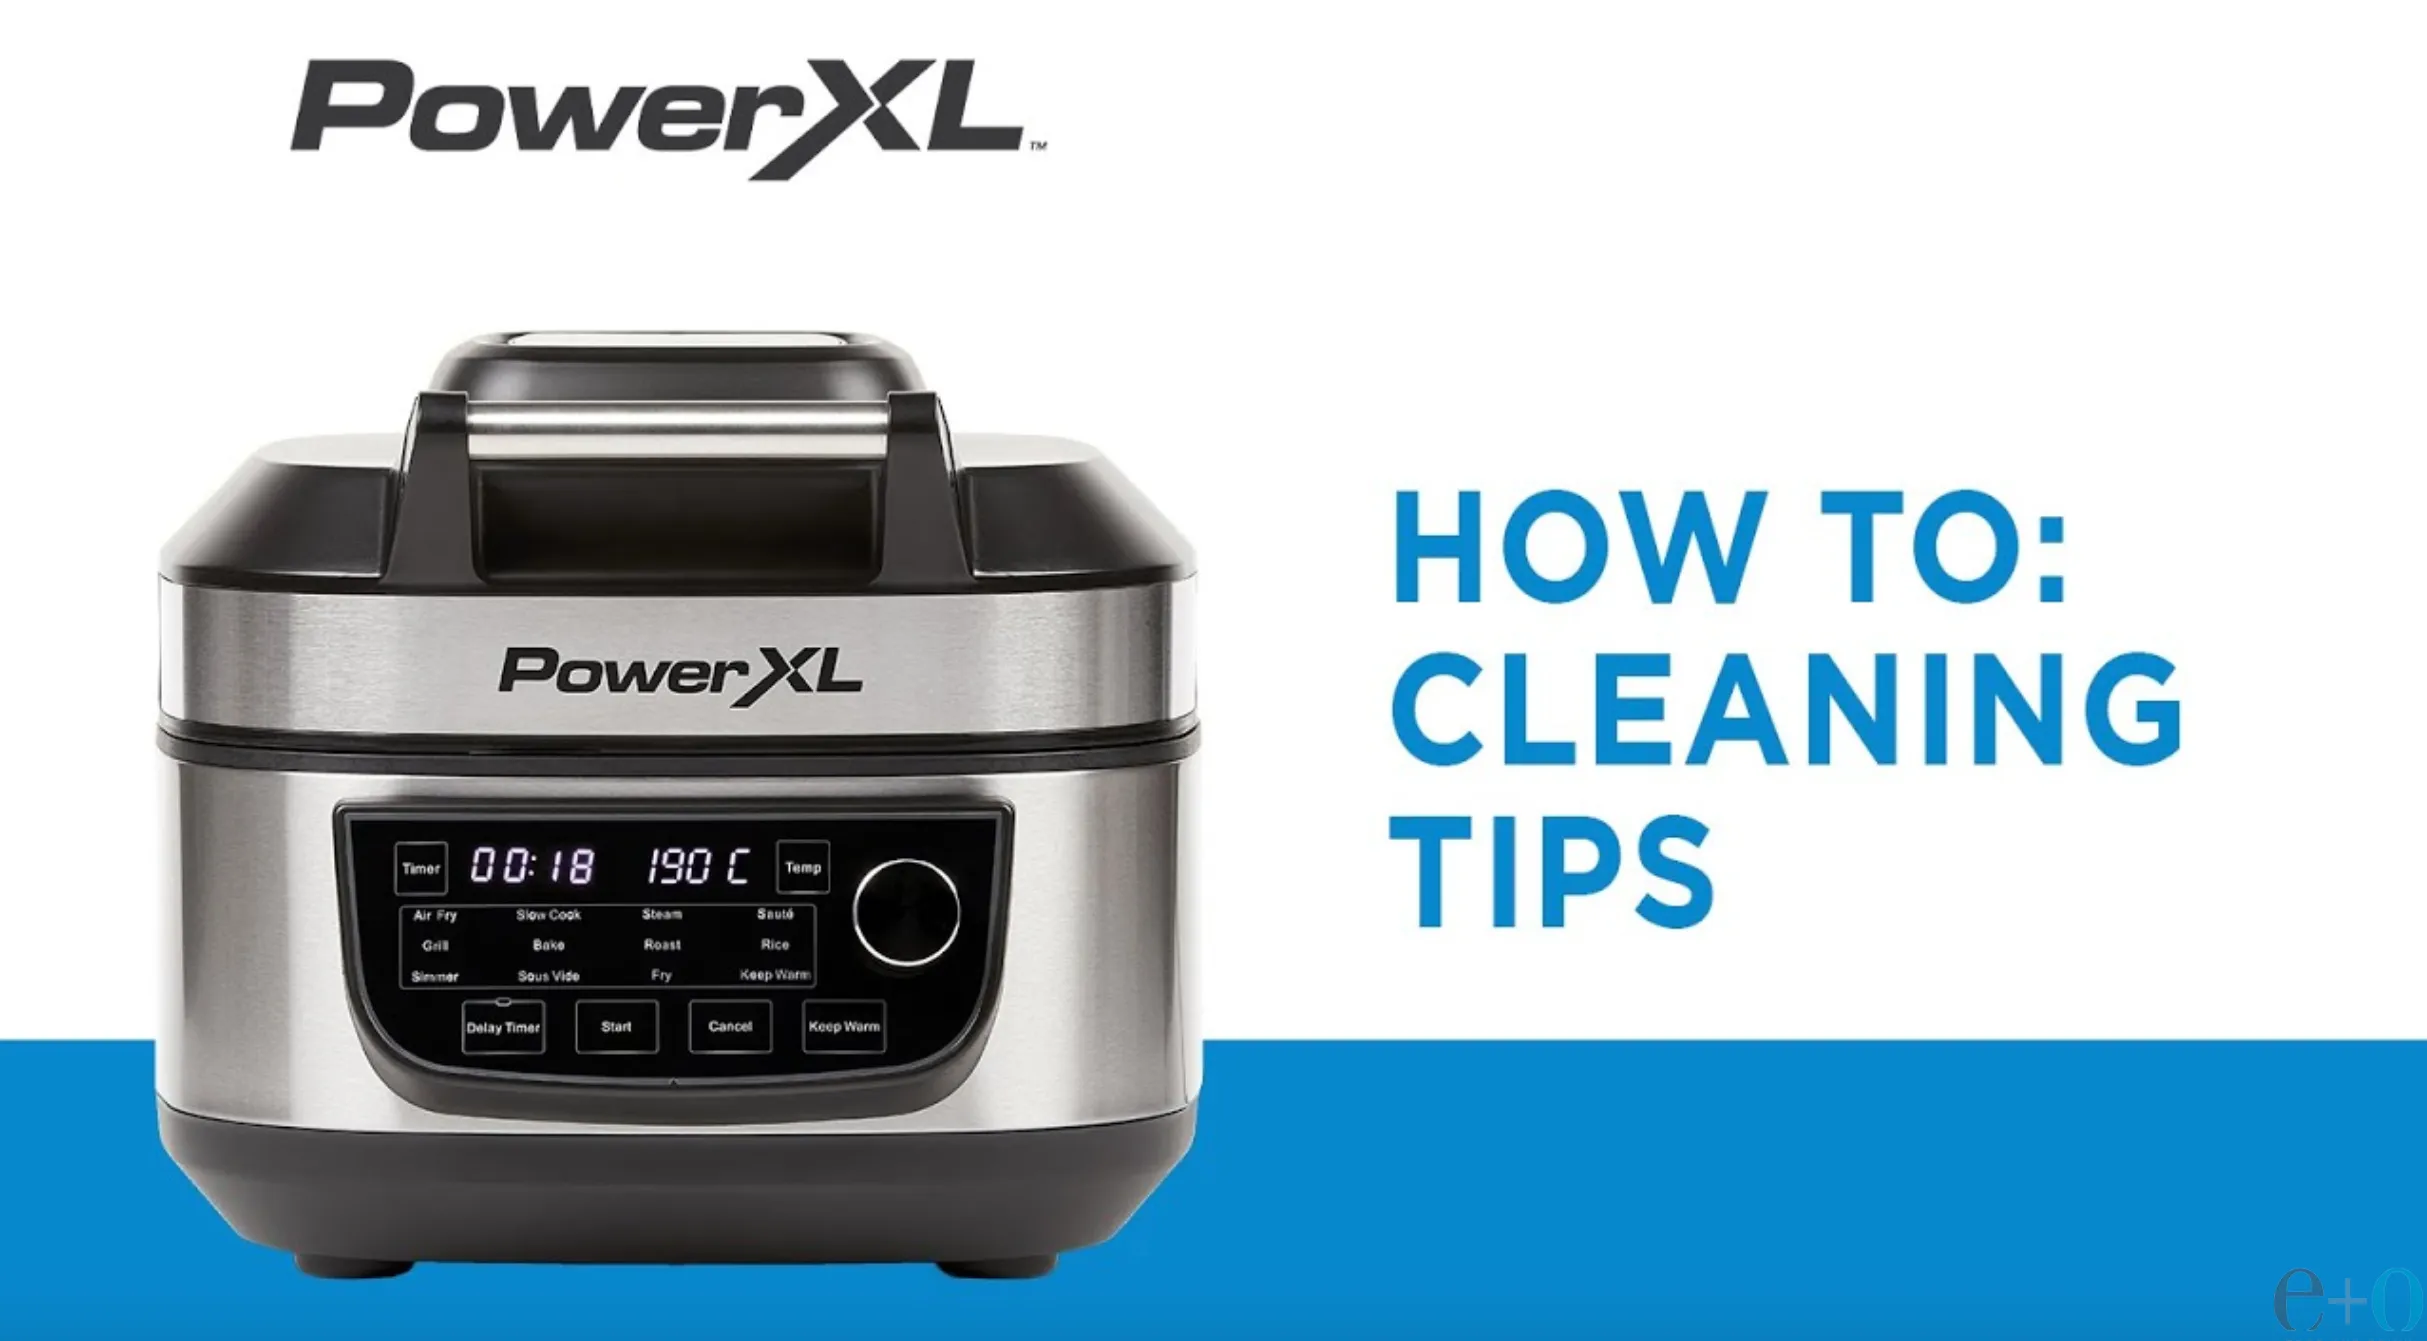 How To Clean Power XL Air Fryer? Caring+Tips